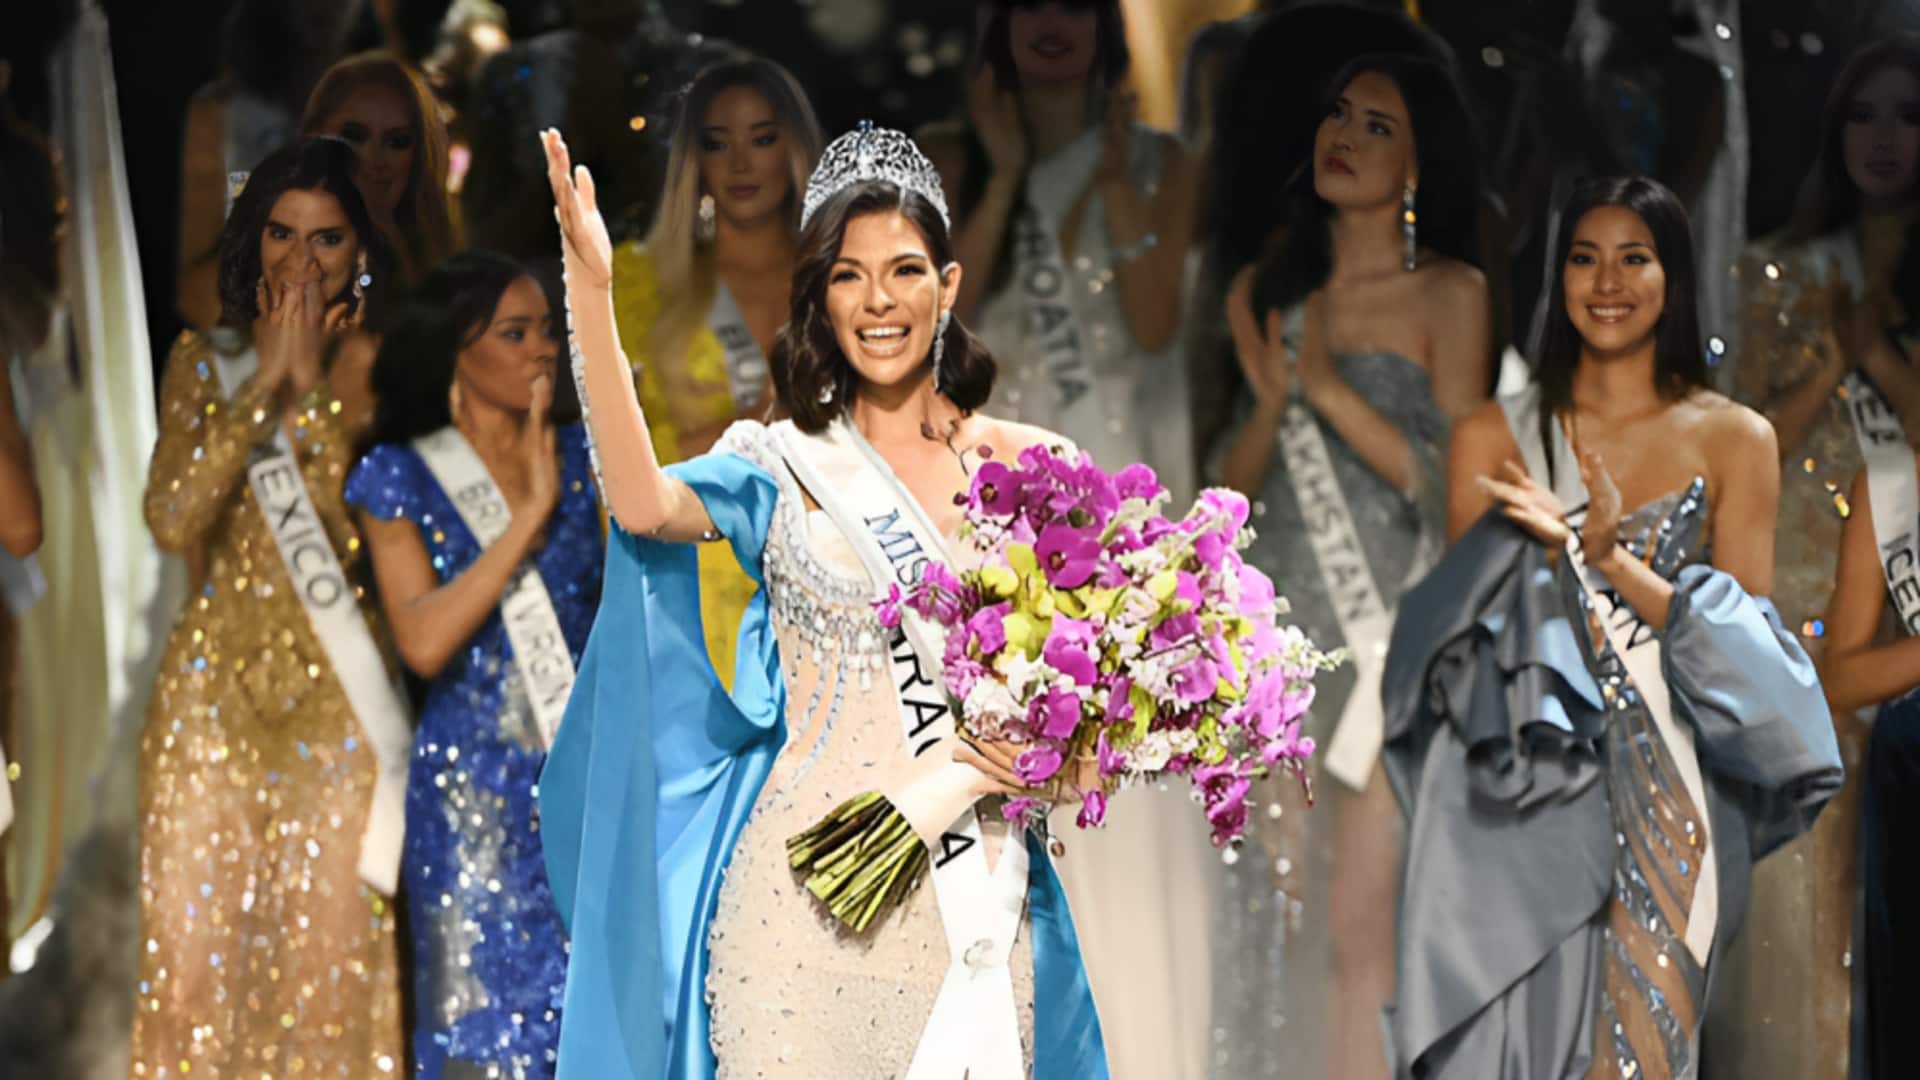 Sheynnis Palacios from Nicaragua crowned Miss Universe 2023!